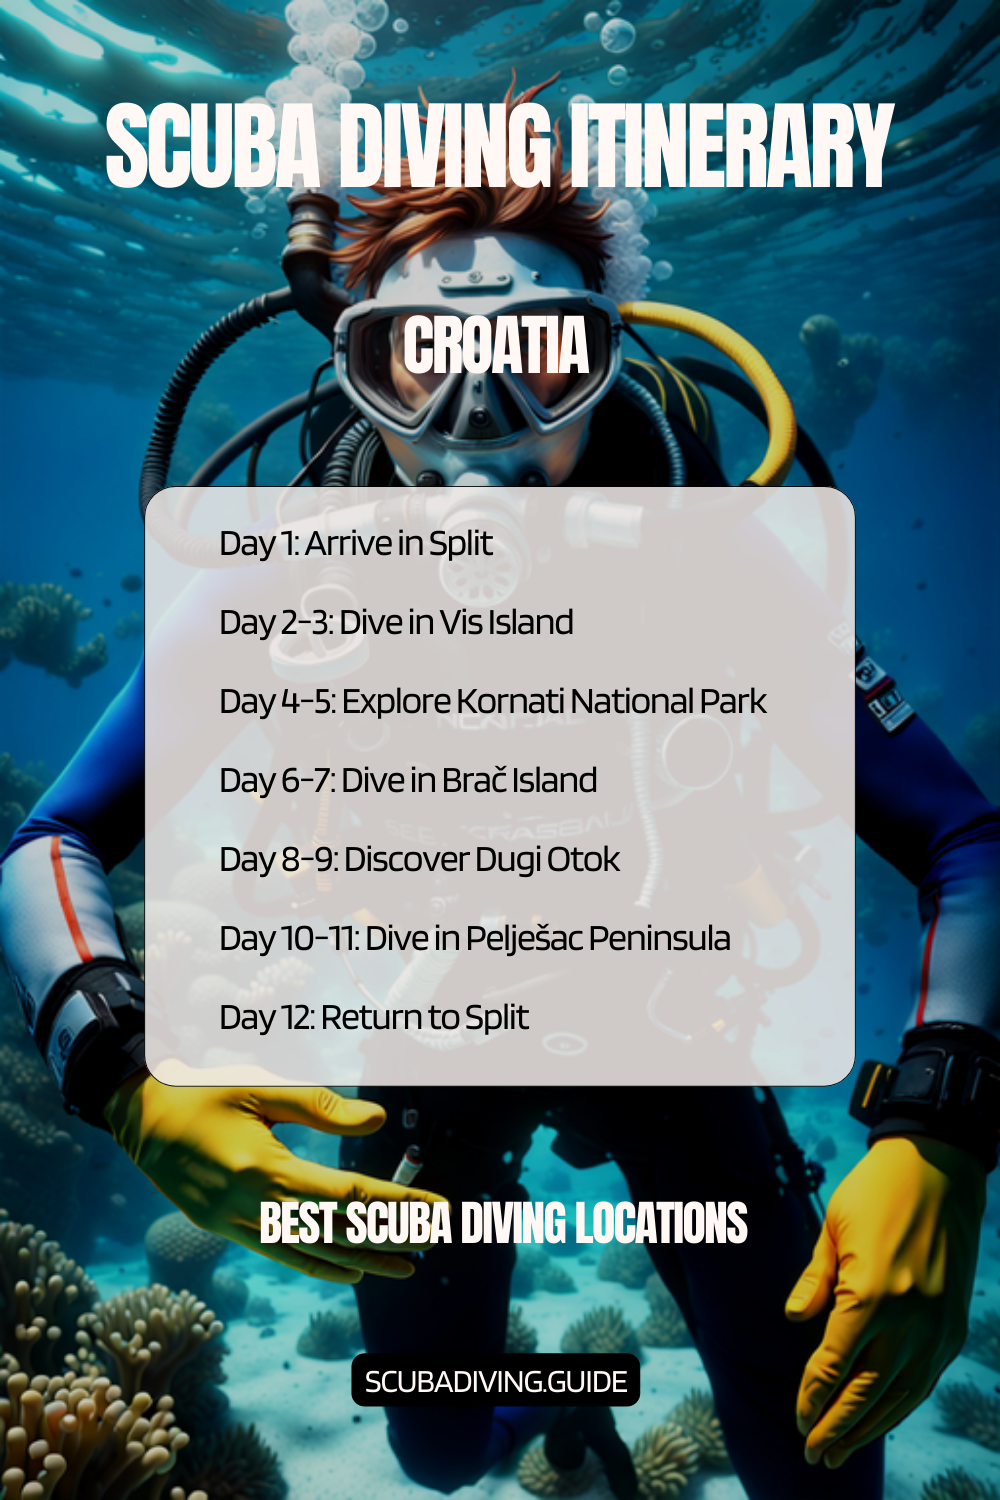 Croatia Recommended Scuba Diving Itinerary